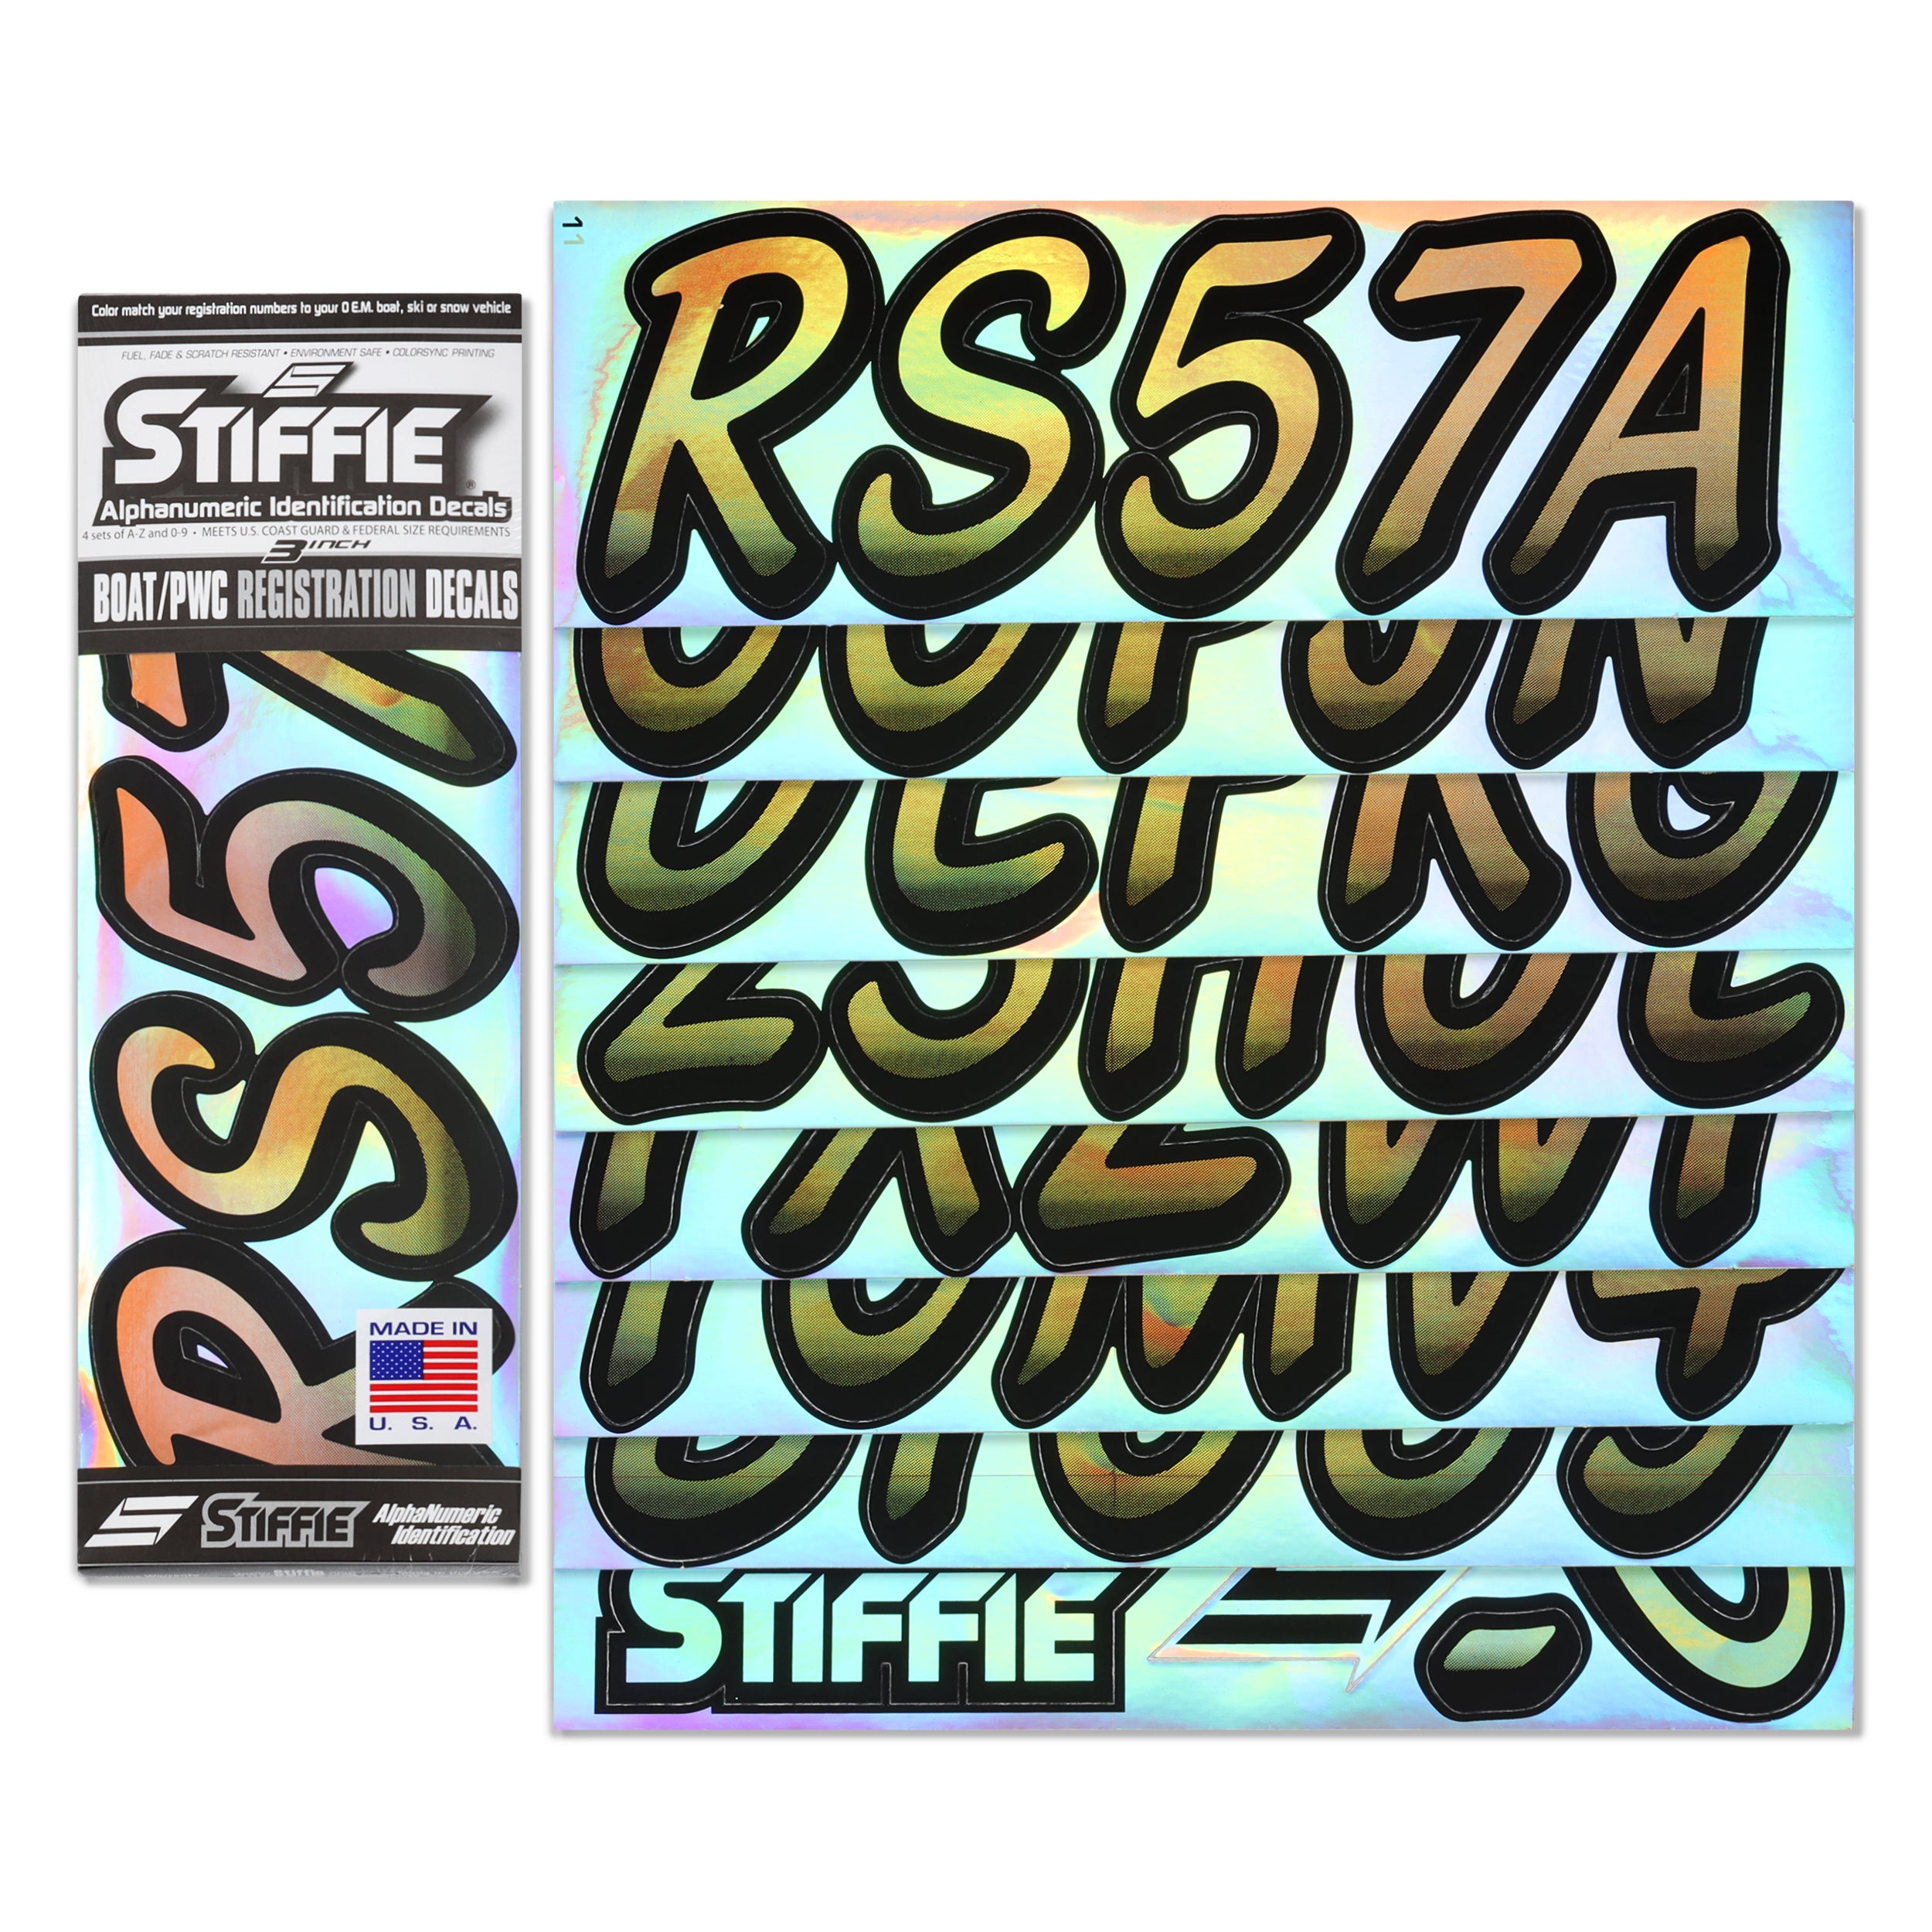 STIFFIE Whipline Reflective Gold/Black 3" Alpha-Numeric Registration Identification Numbers Stickers Decals for Boats & Personal Watercraft